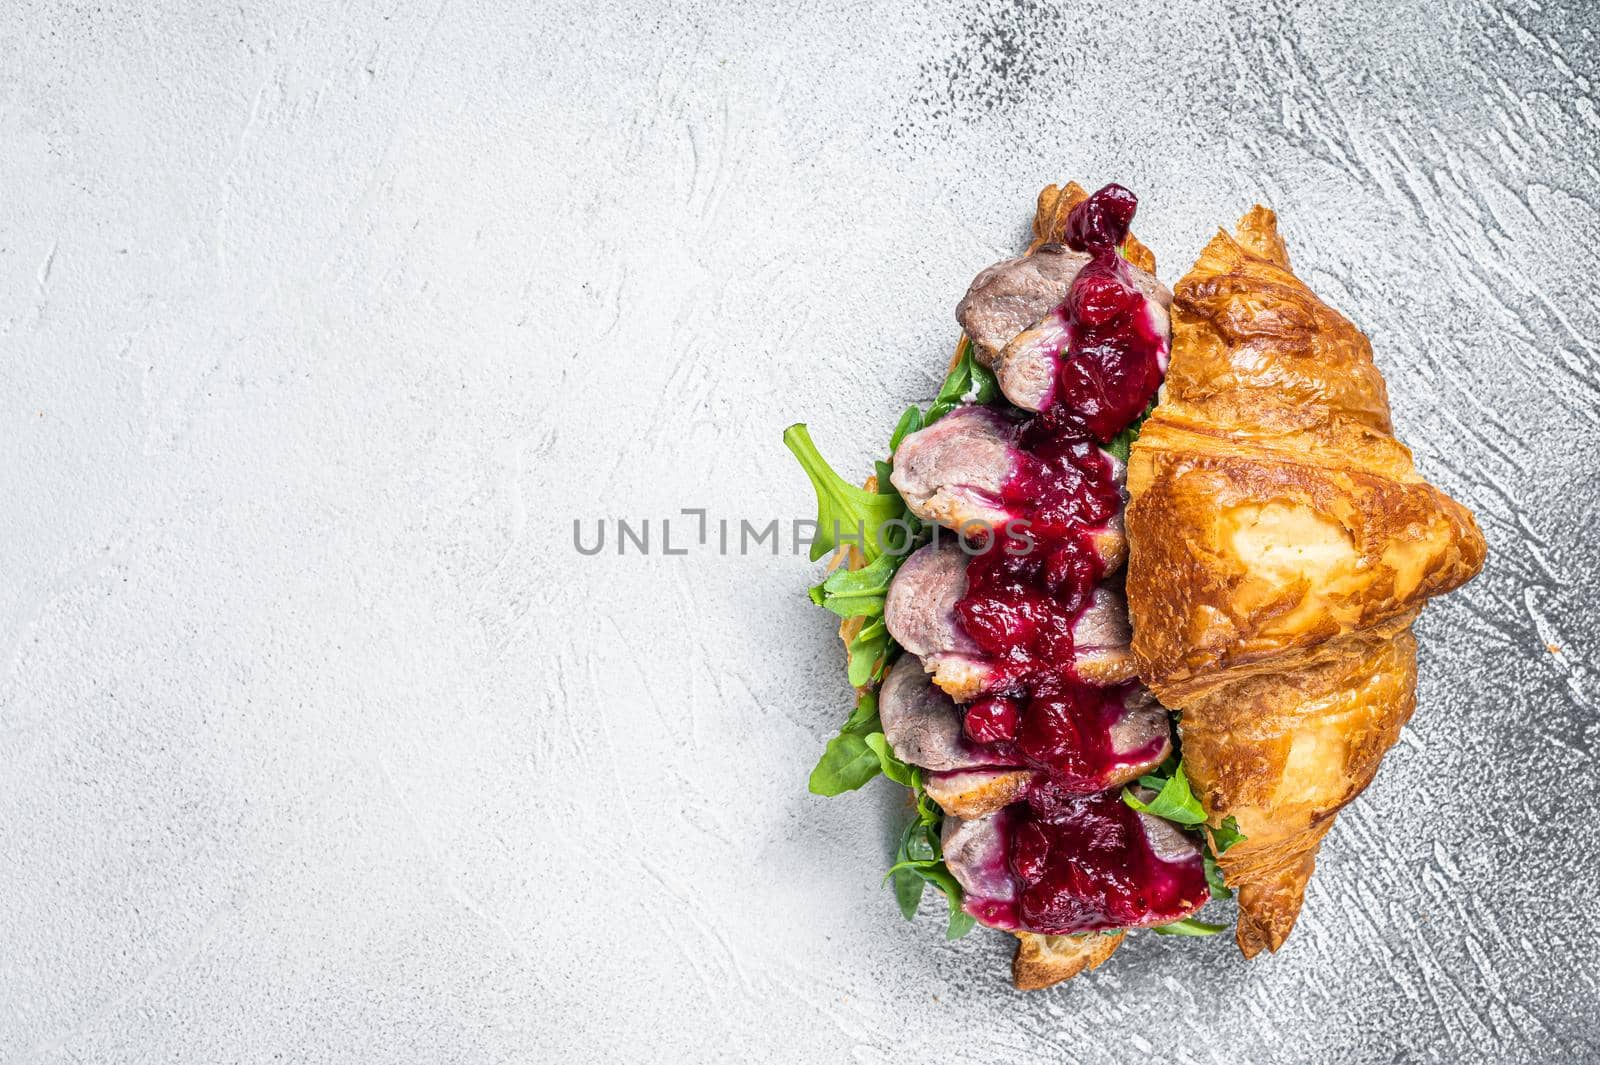 Duck breast Croissant sandwich with steak slices, arugula and sauce. White background. Top View. Copy space.